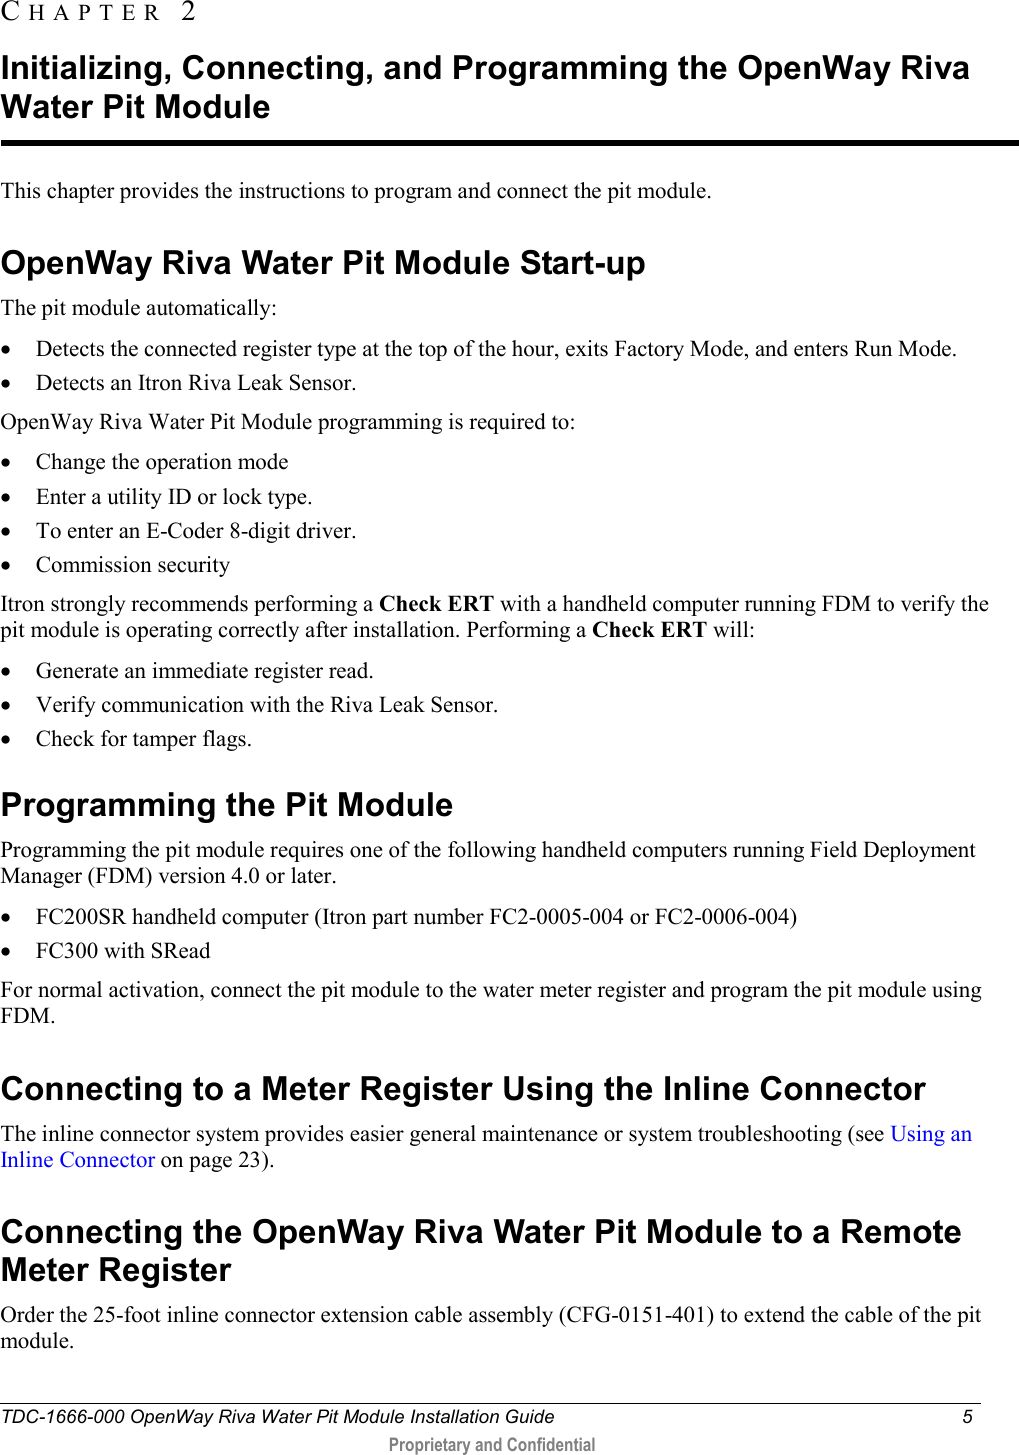  TDC-1666-000 OpenWay Riva Water Pit Module Installation Guide  5   Proprietary and Confidential  This chapter provides the instructions to program and connect the pit module.  OpenWay Riva Water Pit Module Start-up The pit module automatically: • Detects the connected register type at the top of the hour, exits Factory Mode, and enters Run Mode.  • Detects an Itron Riva Leak Sensor. OpenWay Riva Water Pit Module programming is required to:  • Change the operation mode  • Enter a utility ID or lock type. • To enter an E-Coder 8-digit driver. • Commission security Itron strongly recommends performing a Check ERT with a handheld computer running FDM to verify the pit module is operating correctly after installation. Performing a Check ERT will: • Generate an immediate register read. • Verify communication with the Riva Leak Sensor. • Check for tamper flags.  Programming the Pit Module Programming the pit module requires one of the following handheld computers running Field Deployment Manager (FDM) version 4.0 or later. • FC200SR handheld computer (Itron part number FC2-0005-004 or FC2-0006-004) • FC300 with SRead For normal activation, connect the pit module to the water meter register and program the pit module using FDM.   Connecting to a Meter Register Using the Inline Connector The inline connector system provides easier general maintenance or system troubleshooting (see Using an Inline Connector on page 23).  Connecting the OpenWay Riva Water Pit Module to a Remote Meter Register Order the 25-foot inline connector extension cable assembly (CFG-0151-401) to extend the cable of the pit module.    CHAPTER  2  Initializing, Connecting, and Programming the OpenWay Riva Water Pit Module 